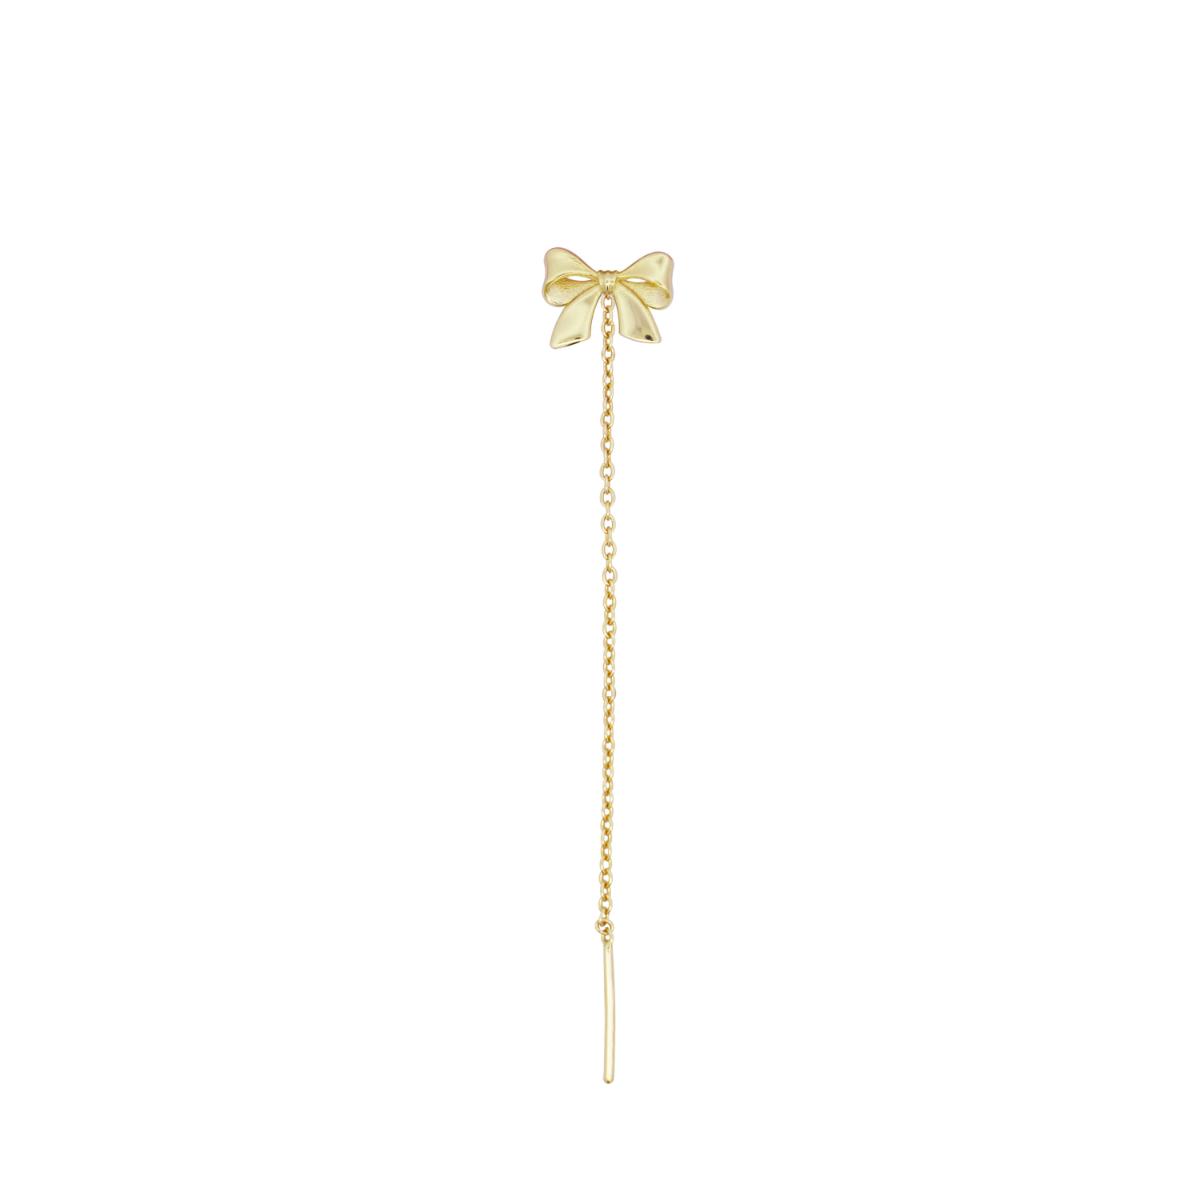 Earrings - Single earring with dangling chain and simple bow - CANDY BOW - 1 | Rue des Mille